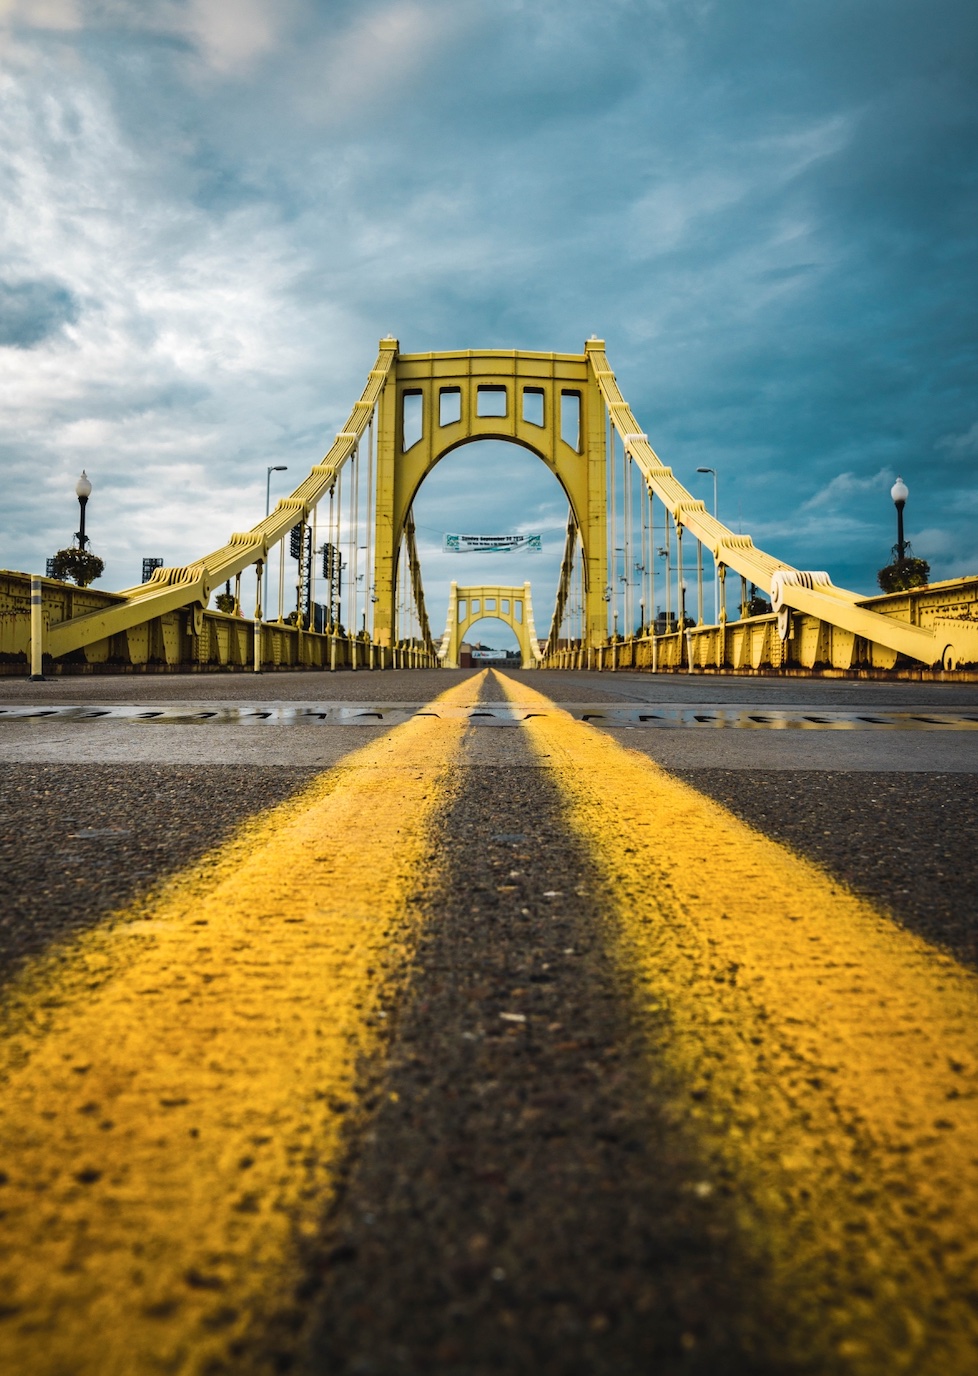 Pavement-level view of double yellow lines on a bridge in Pittsburgh, PA; image by Dylan Sauerwein, via Unsplash.com.